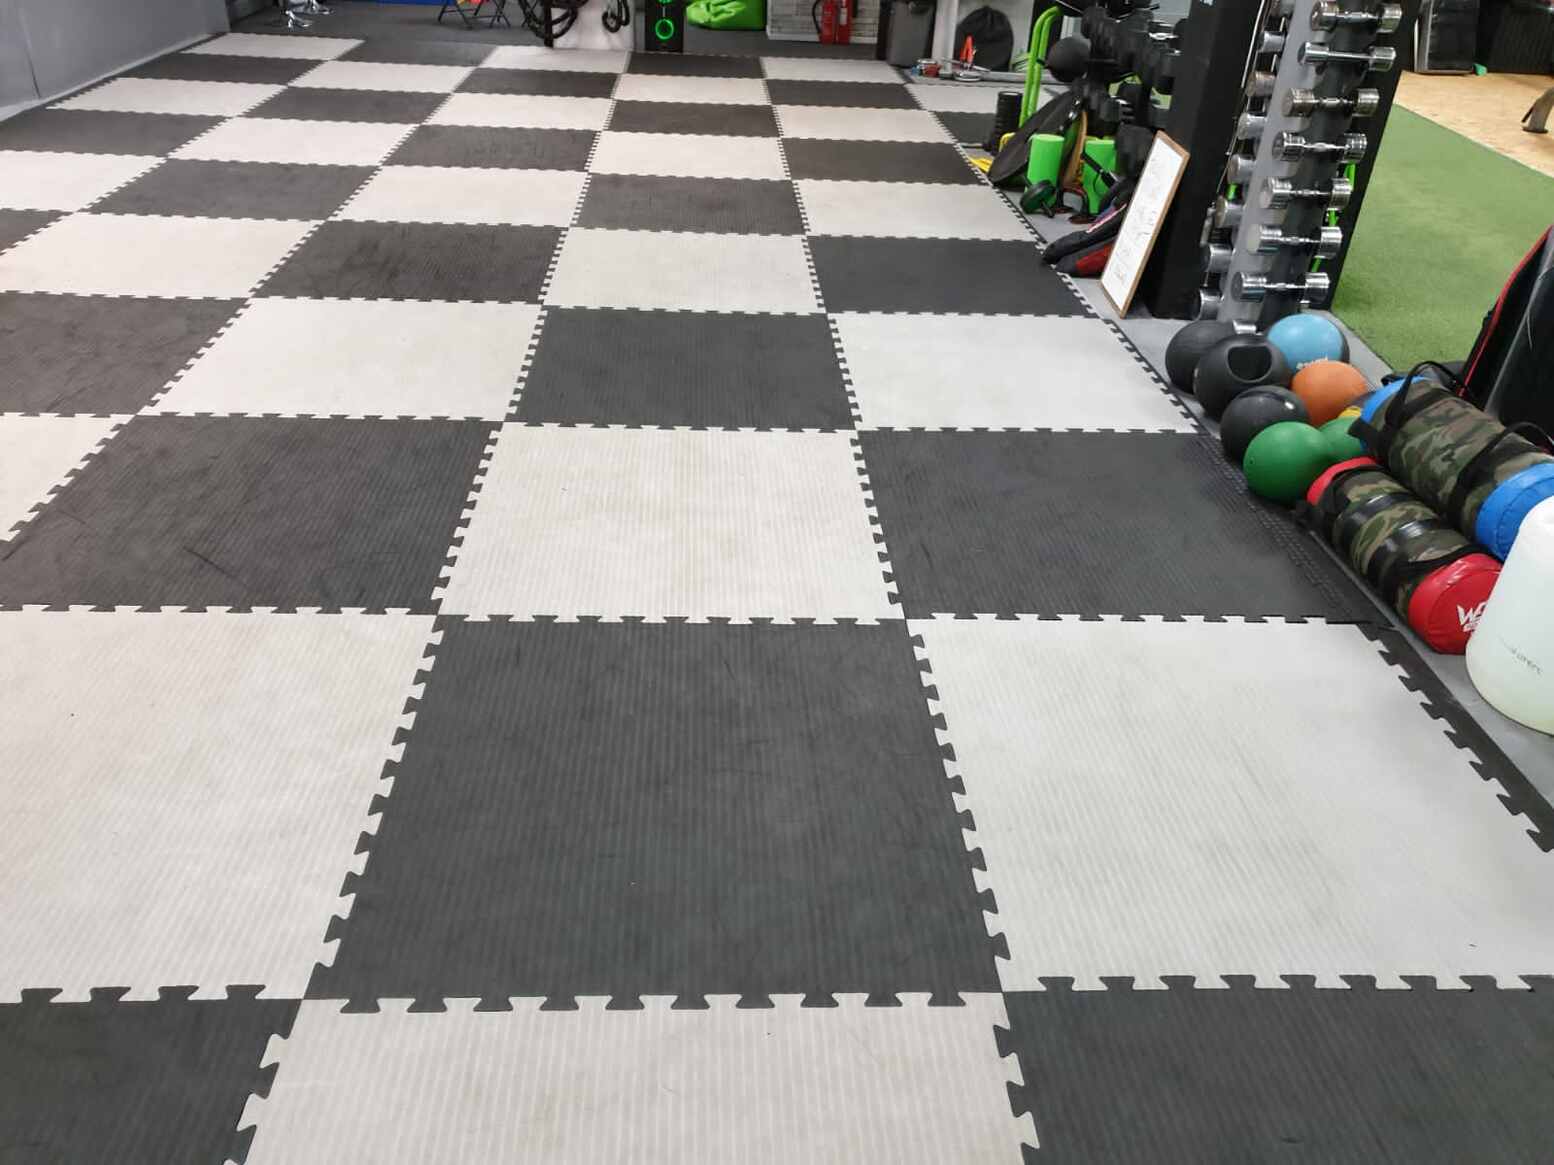 Commercial hard floor cleaned in a gym